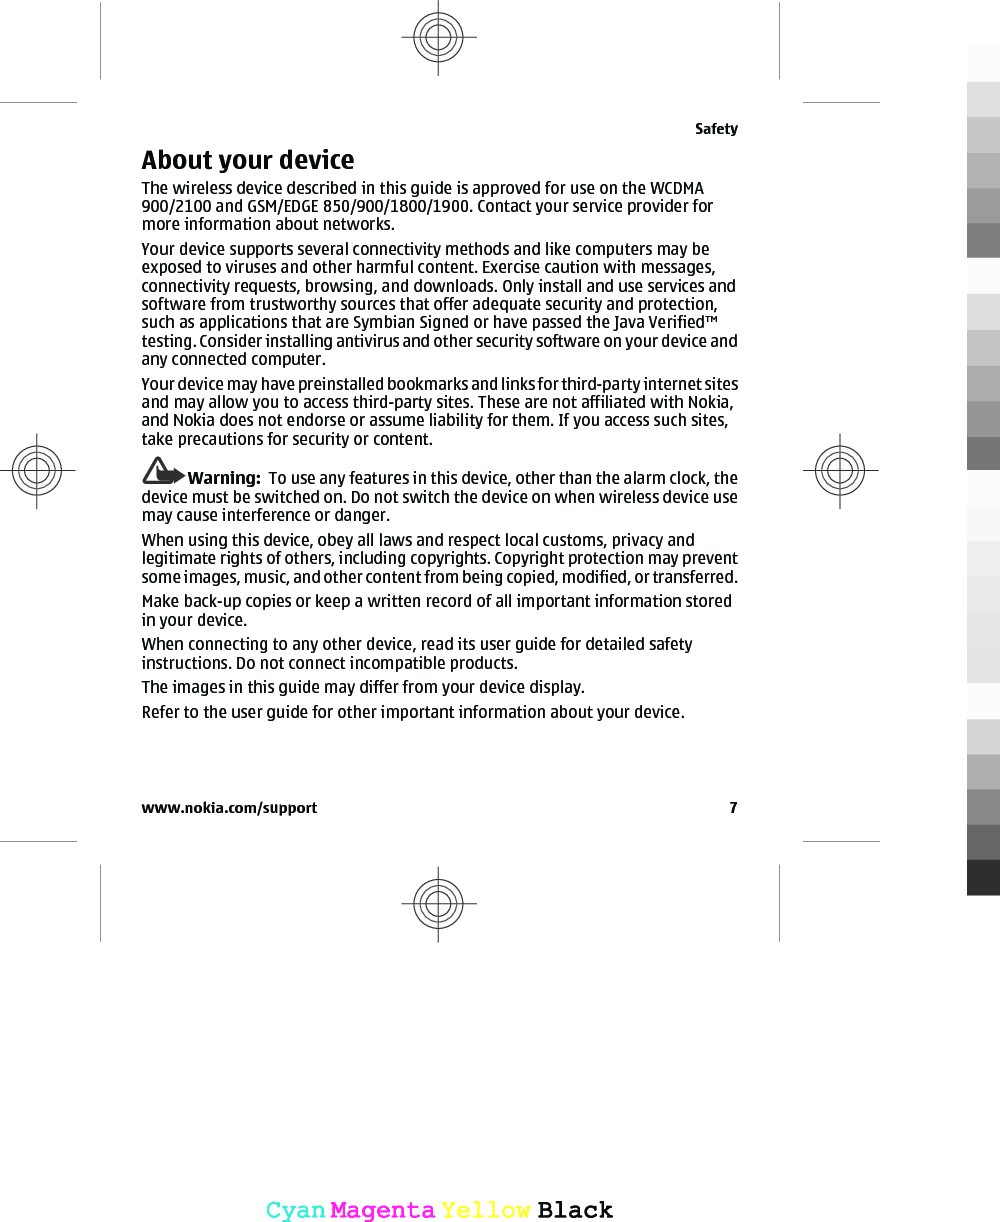 About your deviceThe wireless device described in this guide is approved for use on the WCDMA900/2100 and GSM/EDGE 850/900/1800/1900. Contact your service provider formore information about networks.Your device supports several connectivity methods and like computers may beexposed to viruses and other harmful content. Exercise caution with messages,connectivity requests, browsing, and downloads. Only install and use services andsoftware from trustworthy sources that offer adequate security and protection,such as applications that are Symbian Signed or have passed the Java Verified™testing. Consider installing antivirus and other security software on your device andany connected computer.Your device may have preinstalled bookmarks and links for third-party internet sitesand may allow you to access third-party sites. These are not affiliated with Nokia,and Nokia does not endorse or assume liability for them. If you access such sites,take precautions for security or content.Warning:  To use any features in this device, other than the alarm clock, thedevice must be switched on. Do not switch the device on when wireless device usemay cause interference or danger.When using this device, obey all laws and respect local customs, privacy andlegitimate rights of others, including copyrights. Copyright protection may preventsome images, music, and other content from being copied, modified, or transferred.Make back-up copies or keep a written record of all important information storedin your device.When connecting to any other device, read its user guide for detailed safetyinstructions. Do not connect incompatible products.The images in this guide may differ from your device display.Refer to the user guide for other important information about your device.Safetywww.nokia.com/support 7CyanCyanMagentaMagentaYellowYellowBlackBlack